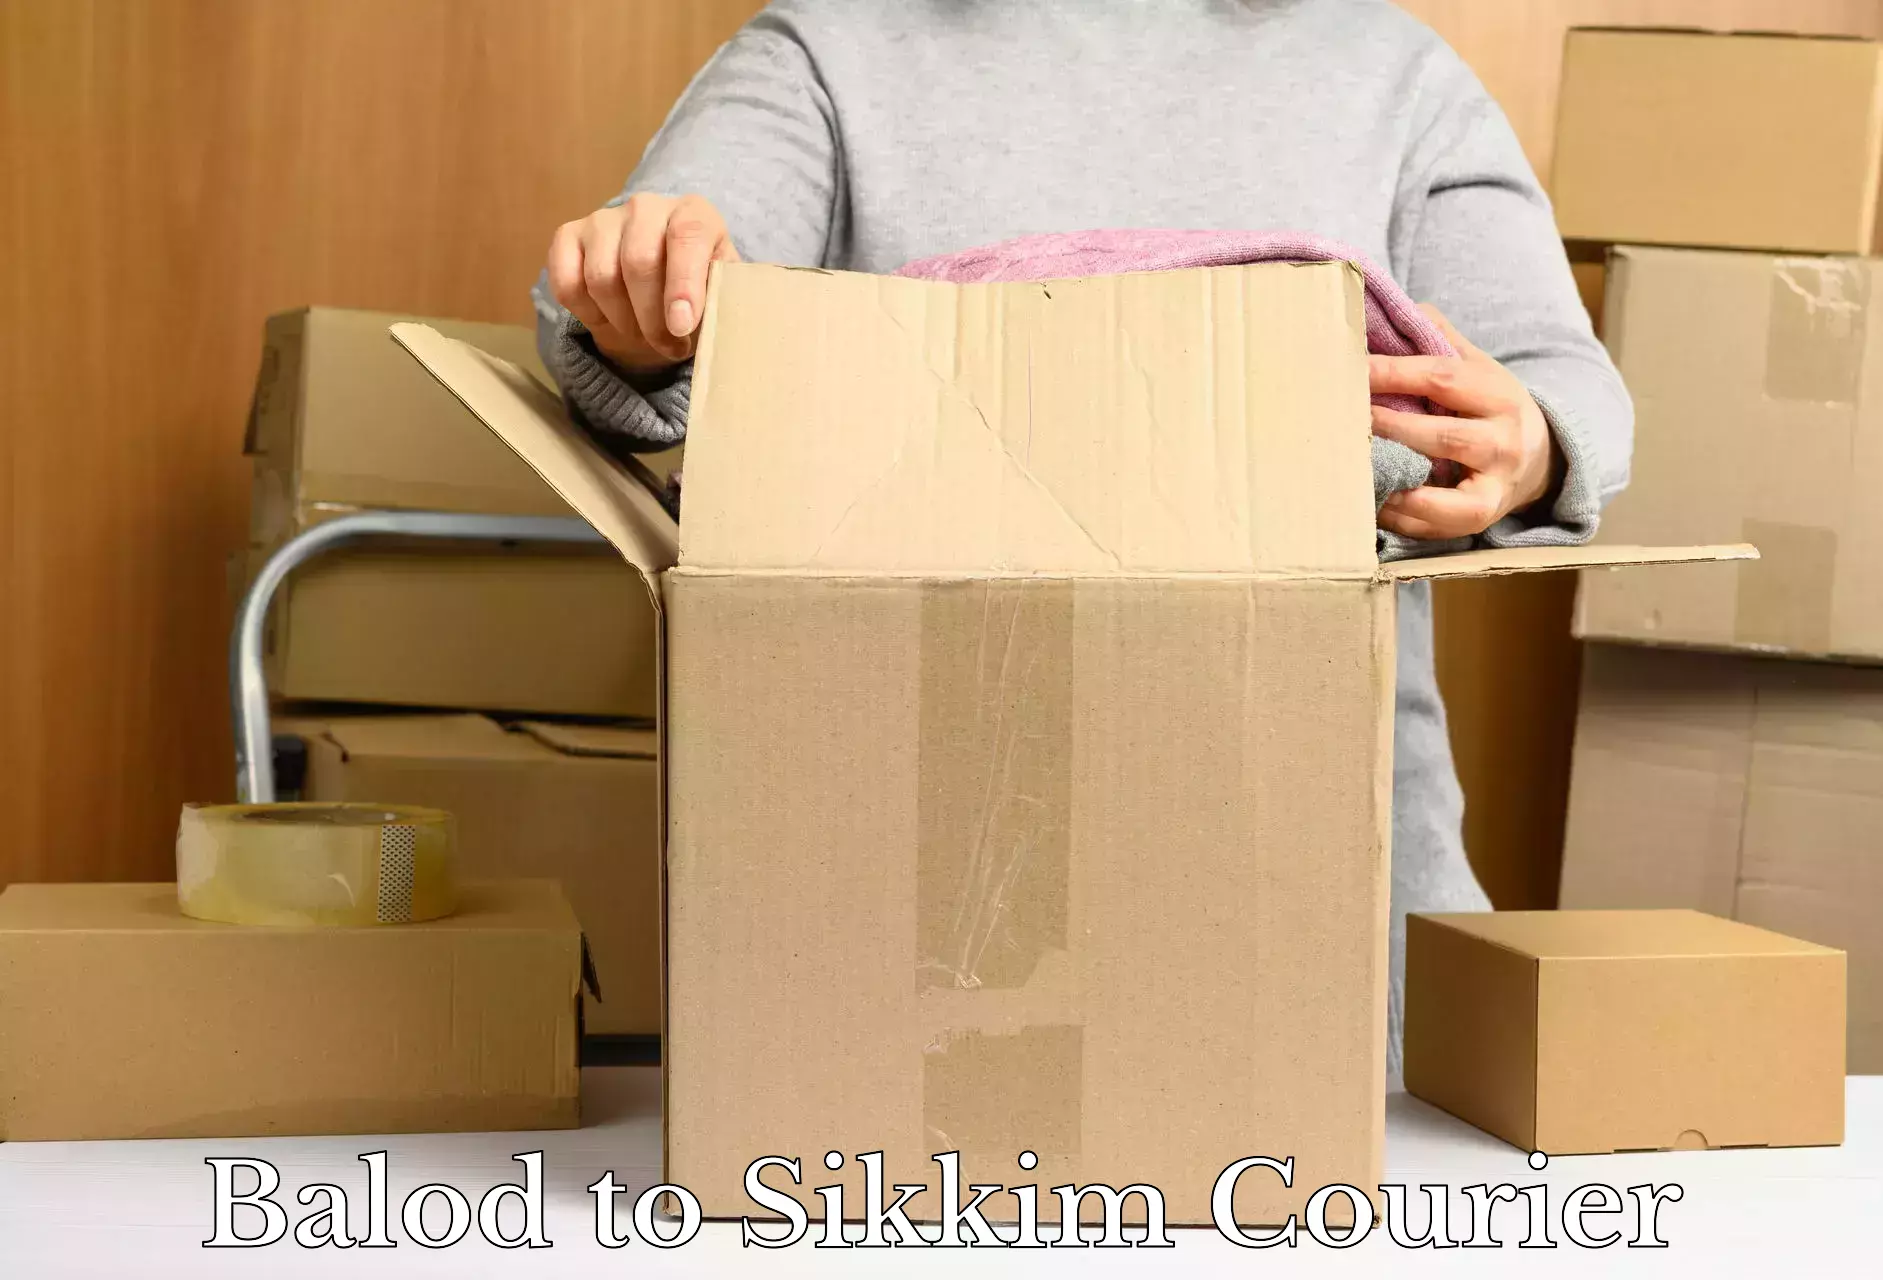 Trusted moving company Balod to Sikkim